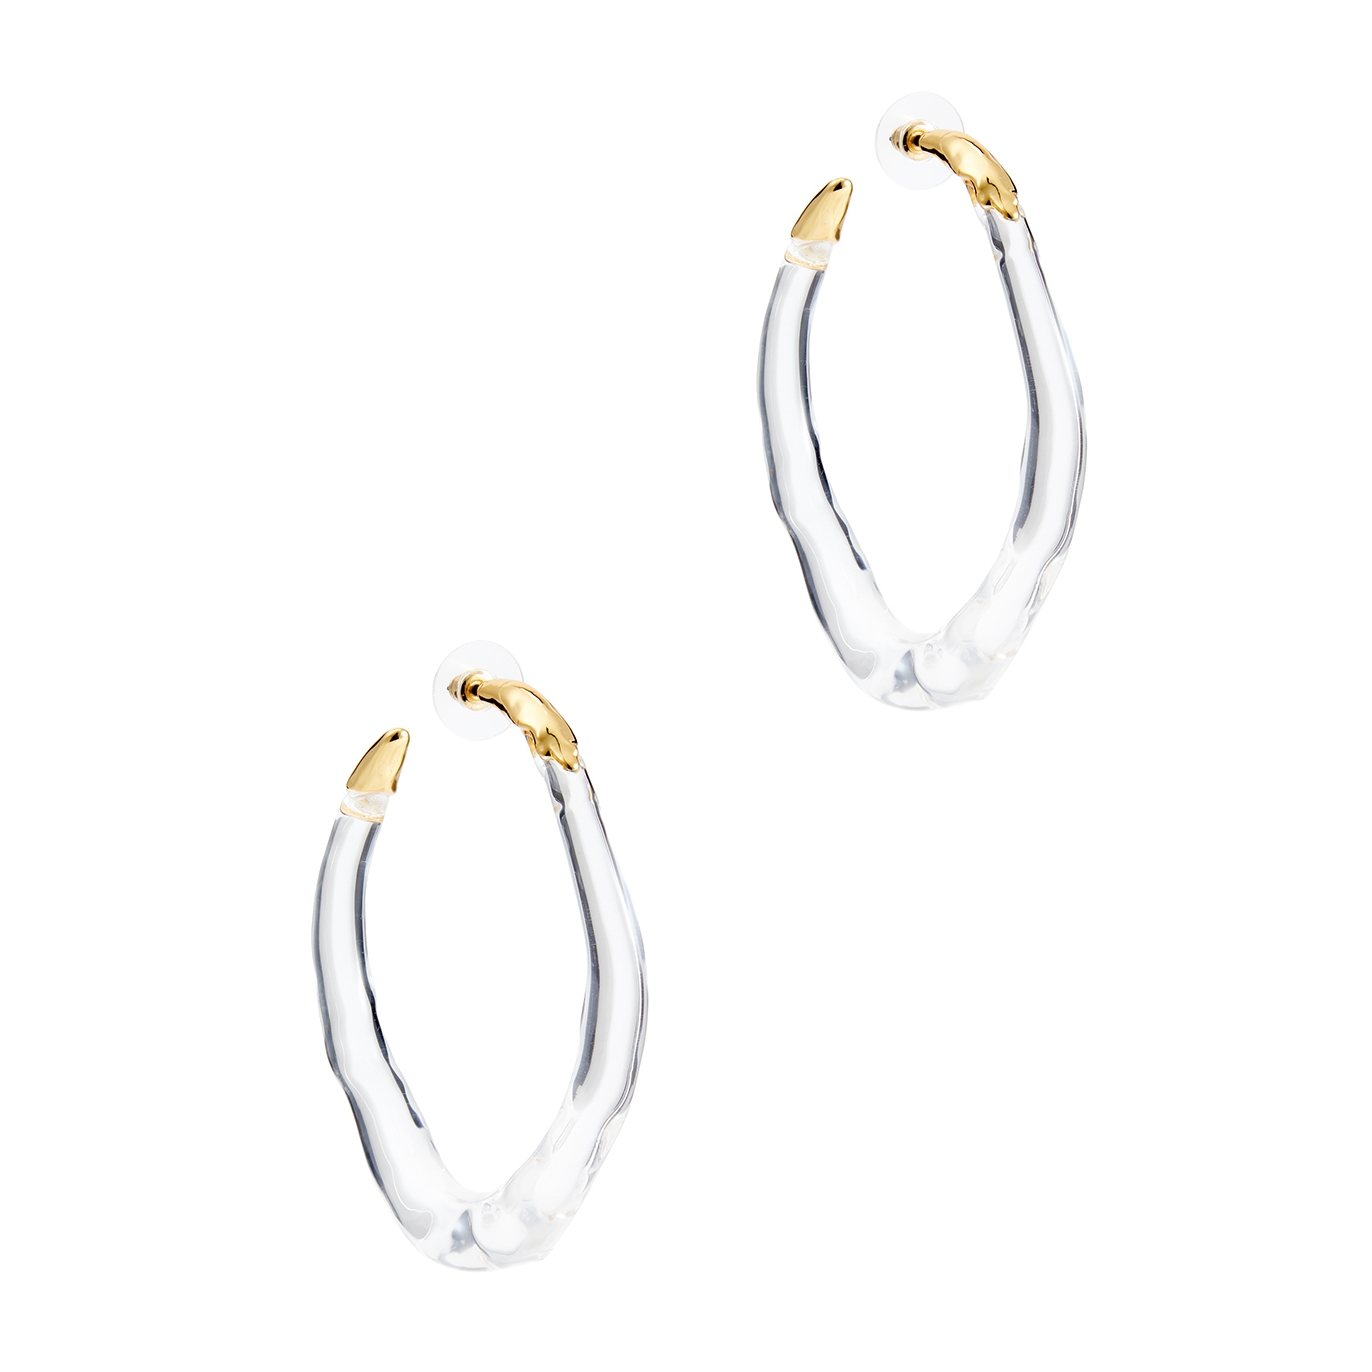 Alexis Bittar Molten Lucite And 14kt Gold-plated Hoop Earrings